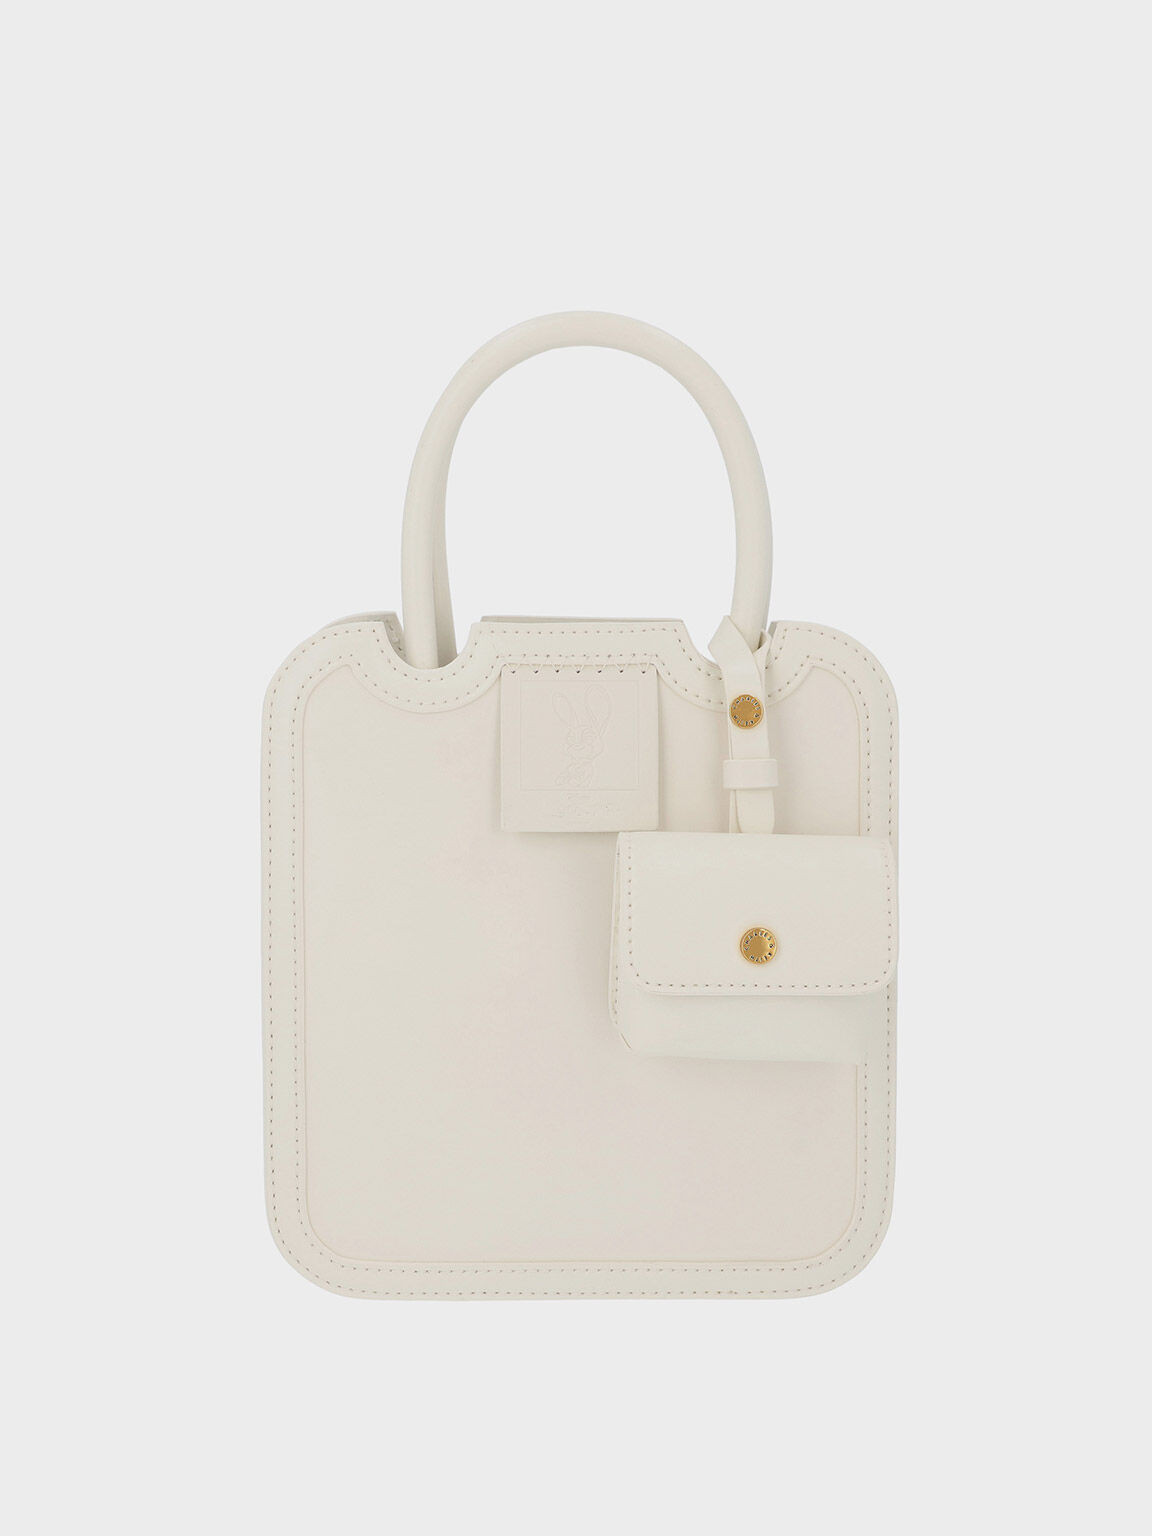 Structured Tote Bag, Charles and Keith, Rs 13099